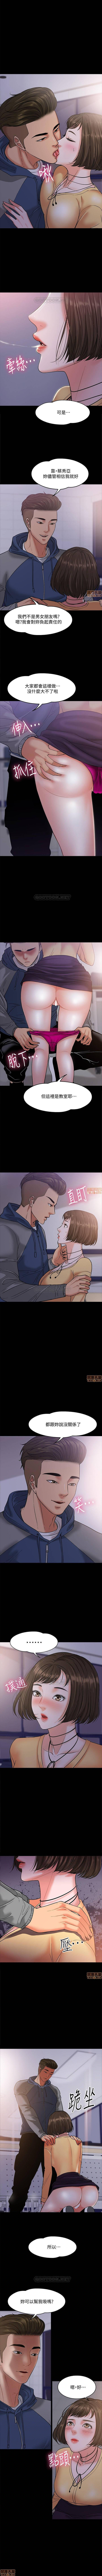 PROFESSOR, ARE YOU JUST GOING TO LOOK AT ME? | DESIRE SWAMP | 教授，你還等什麼? Ch. 5 [Chinese] Manhwa 6